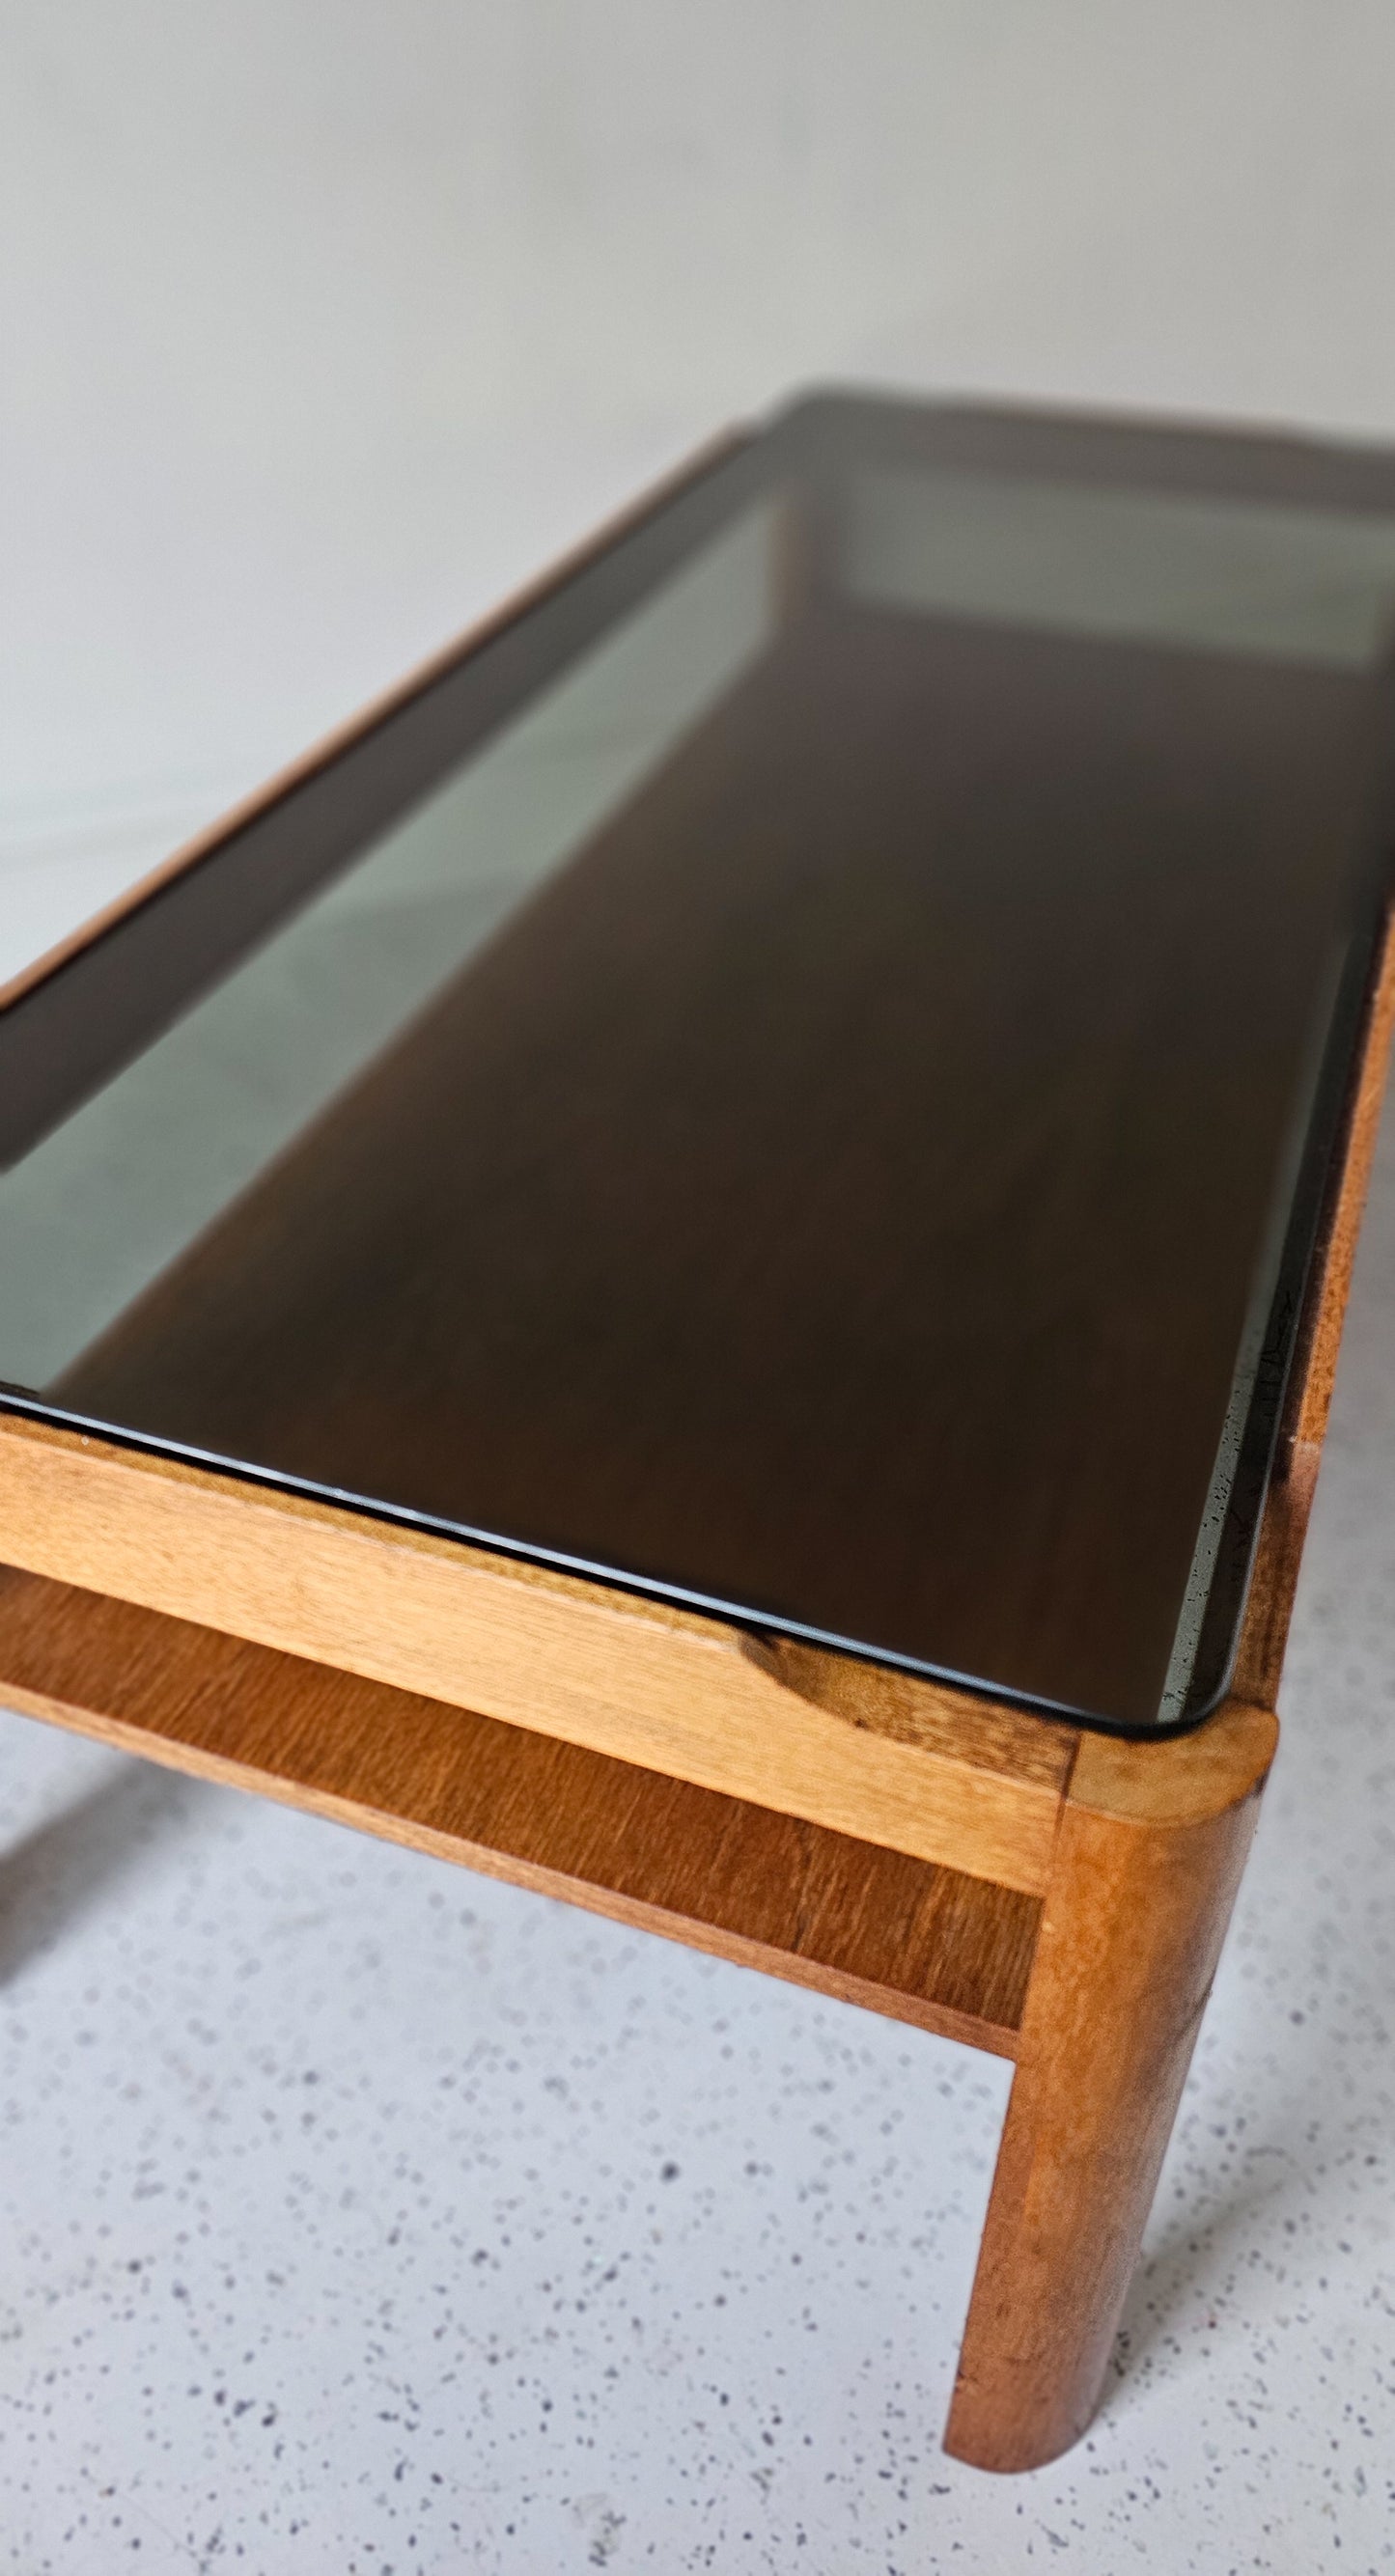 The Myer Mid Century Smoked Glass Coffee Table